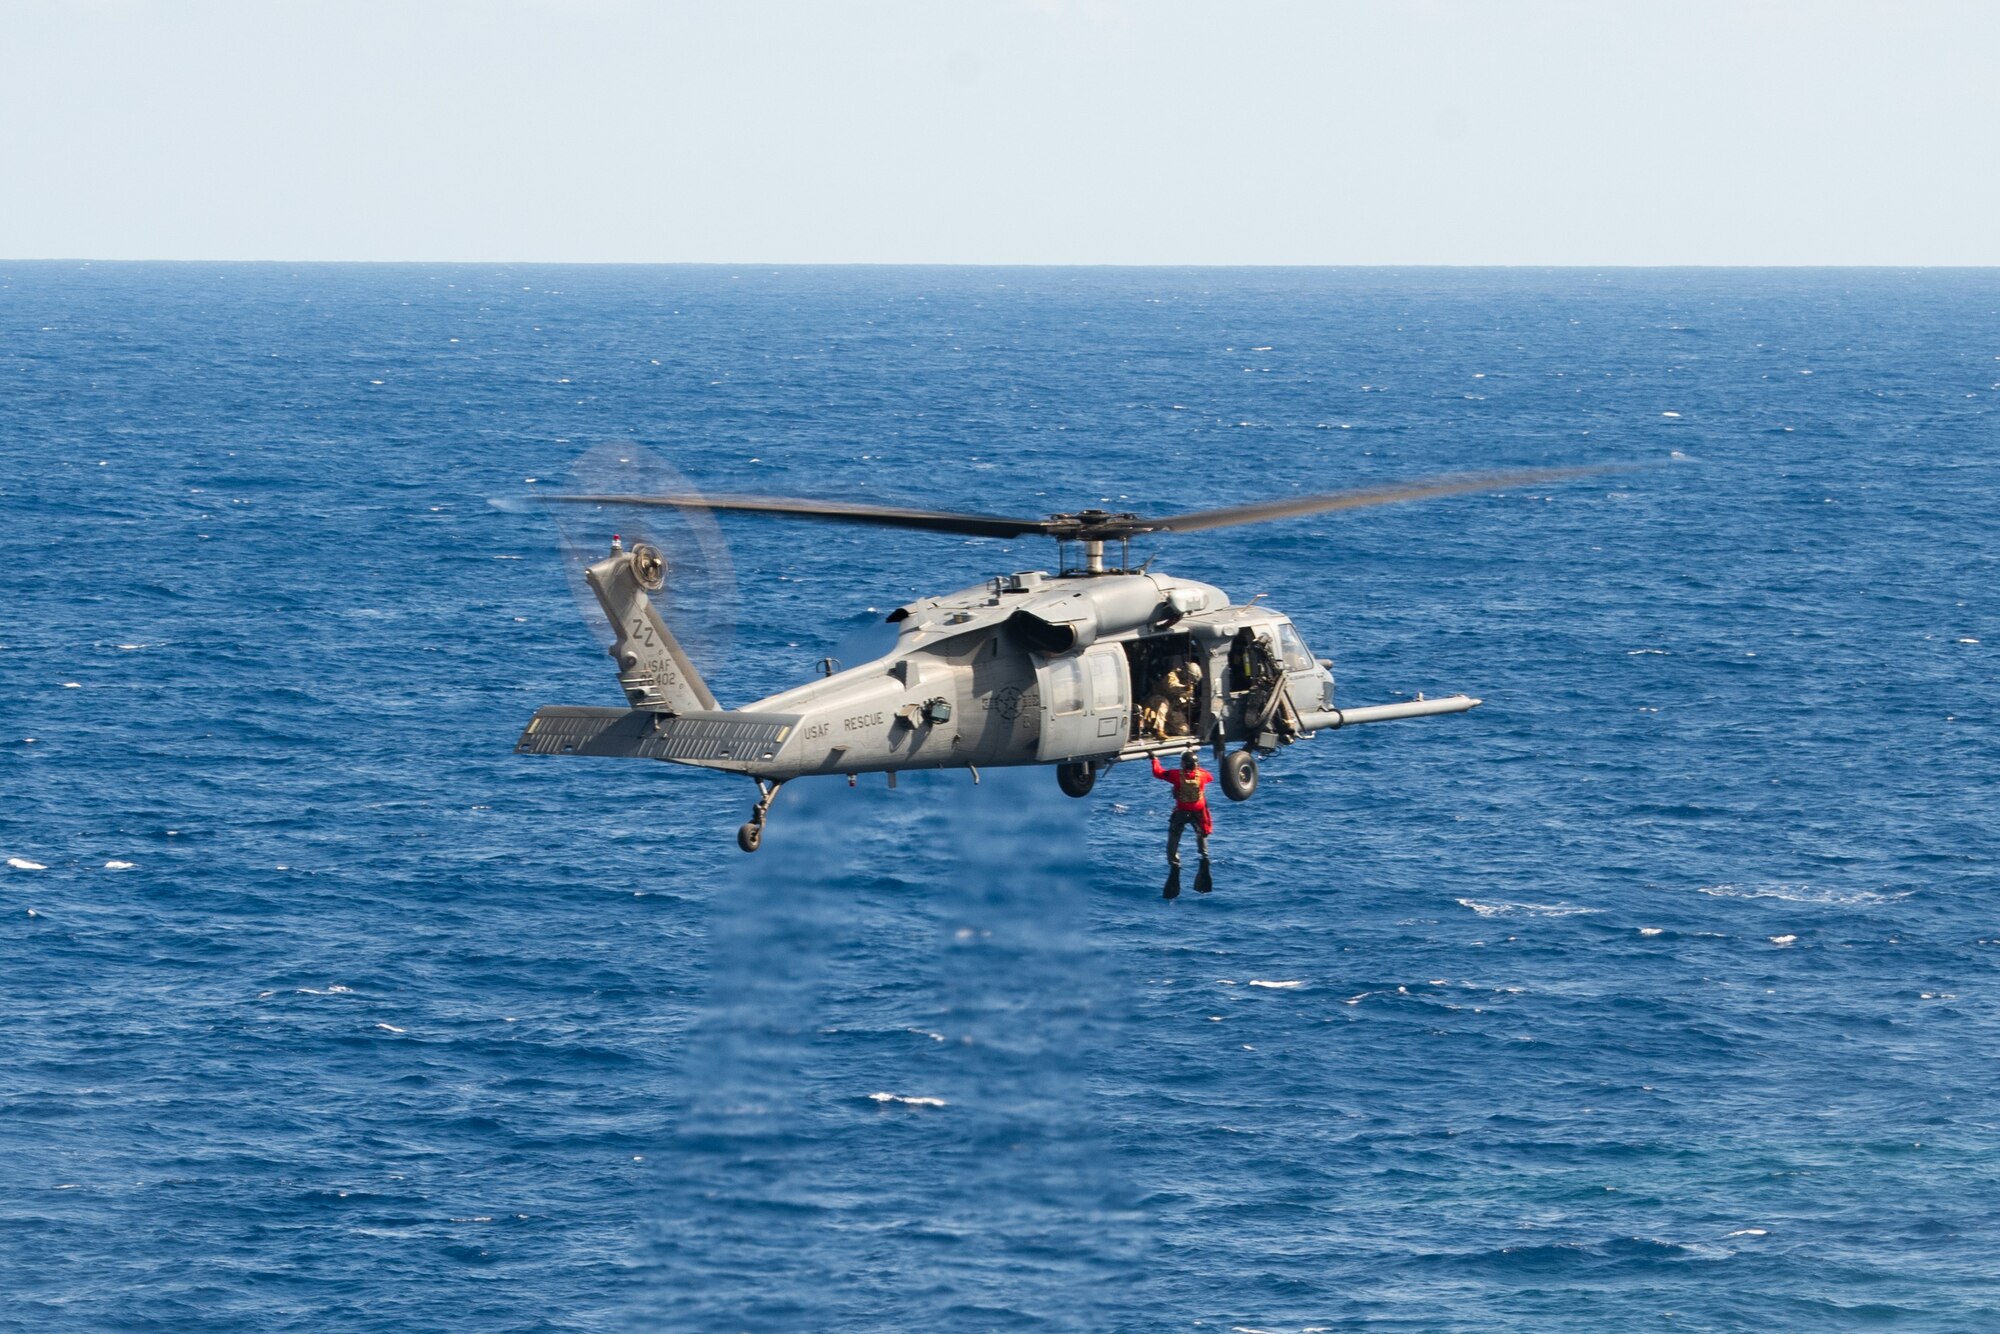 A diver gets hoisted up into a helicopter